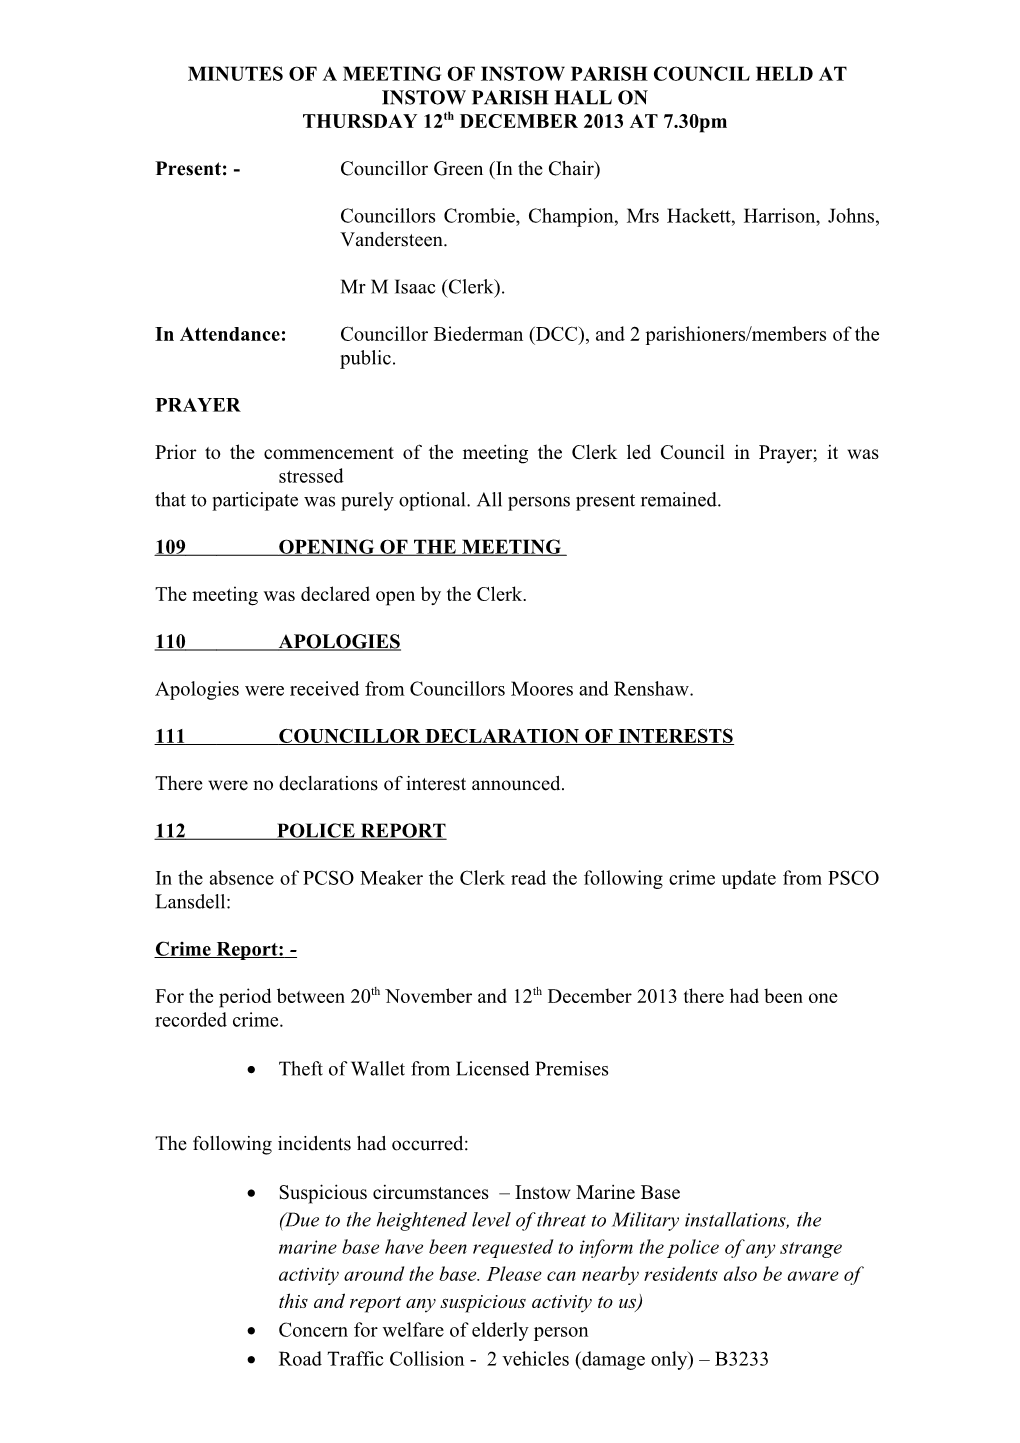 Minutes of a Meeting of Instow Parish Council Held at Instow Parish Hall On